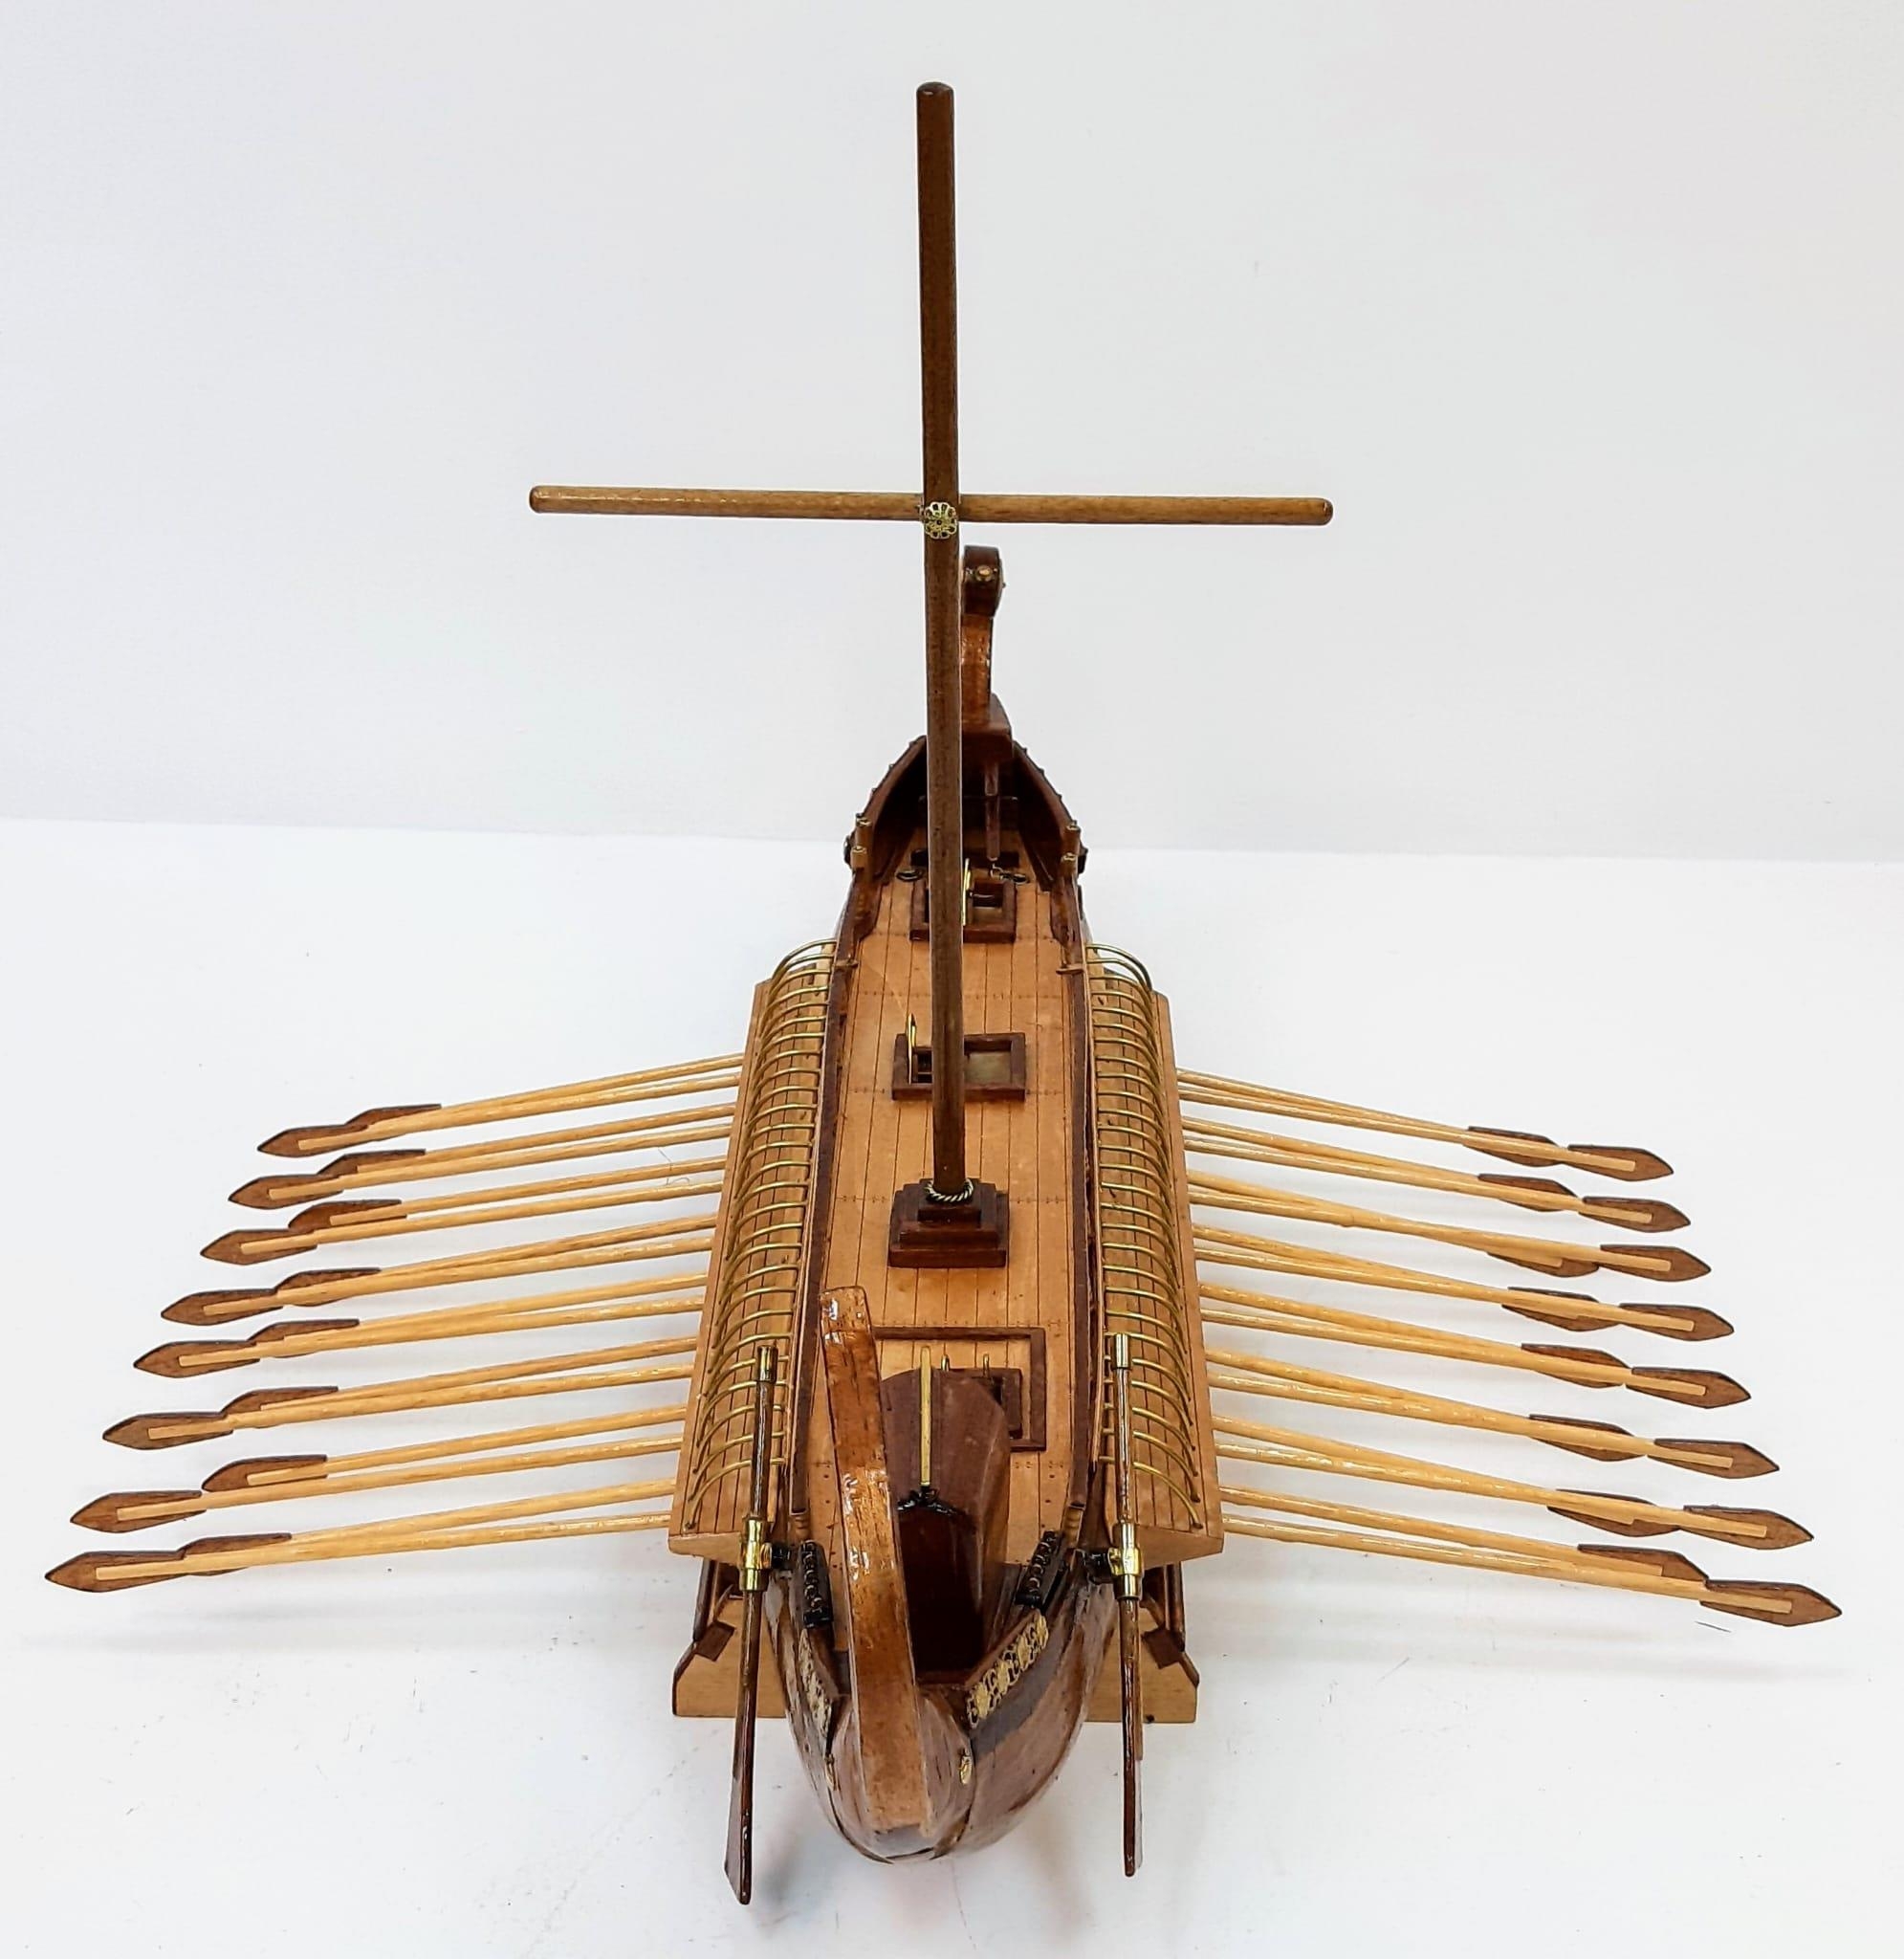 A Hand Crafted Wooden Viking Long Ship in Excellent Condition. 60cm in length. - Image 4 of 10